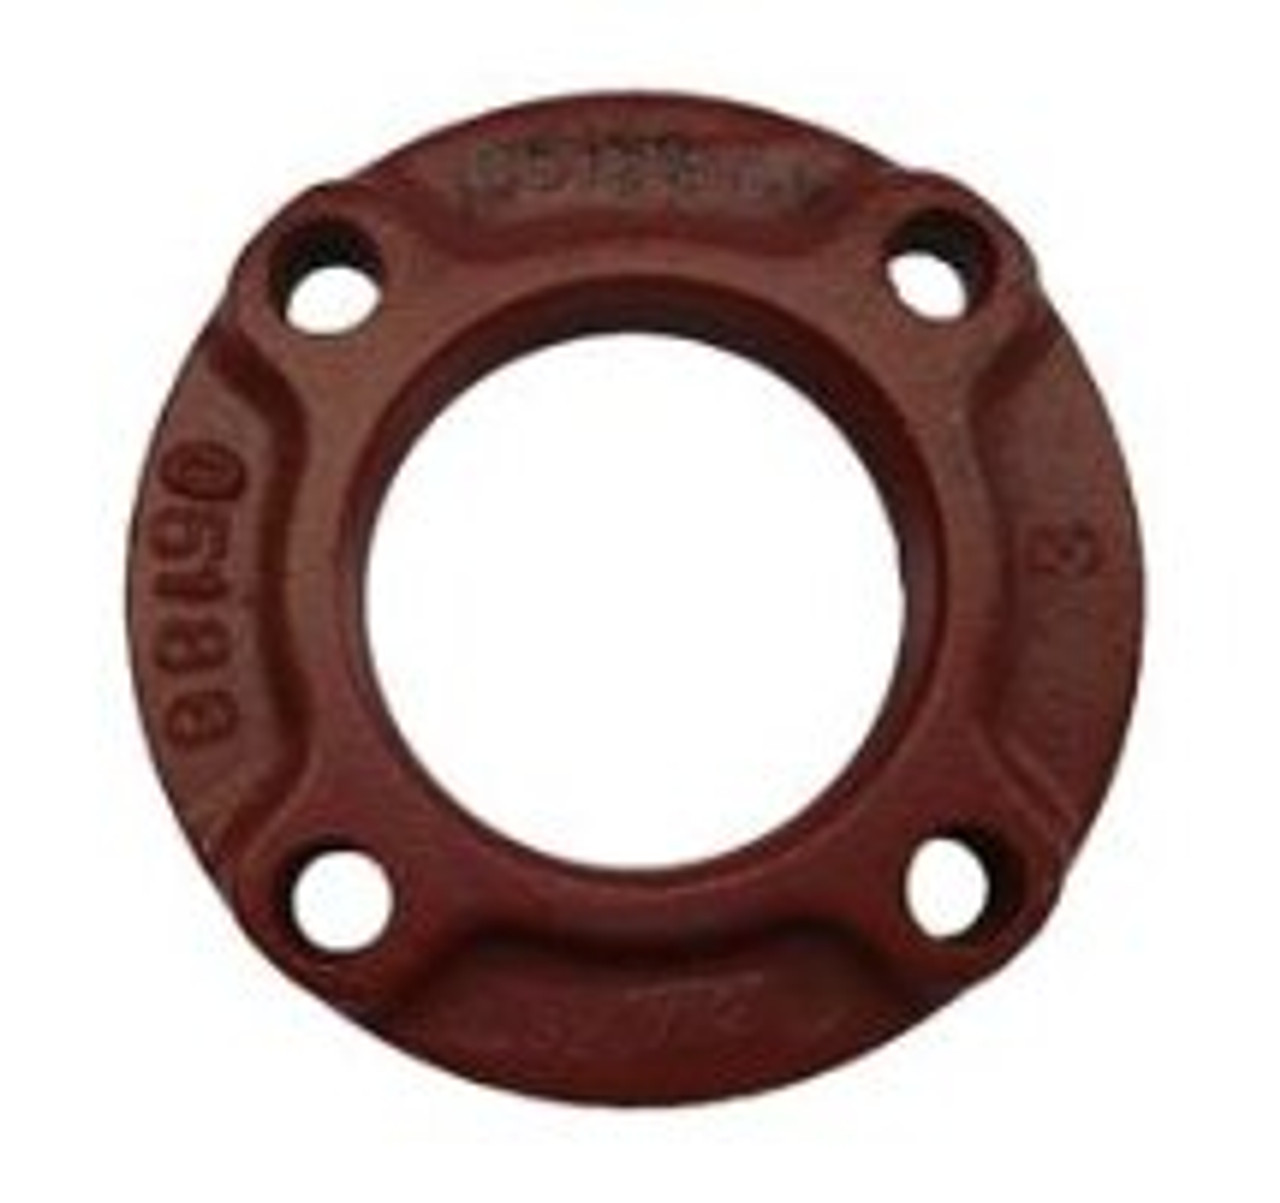 105188-011 Armstrong Cast Iron Pump Flange 3